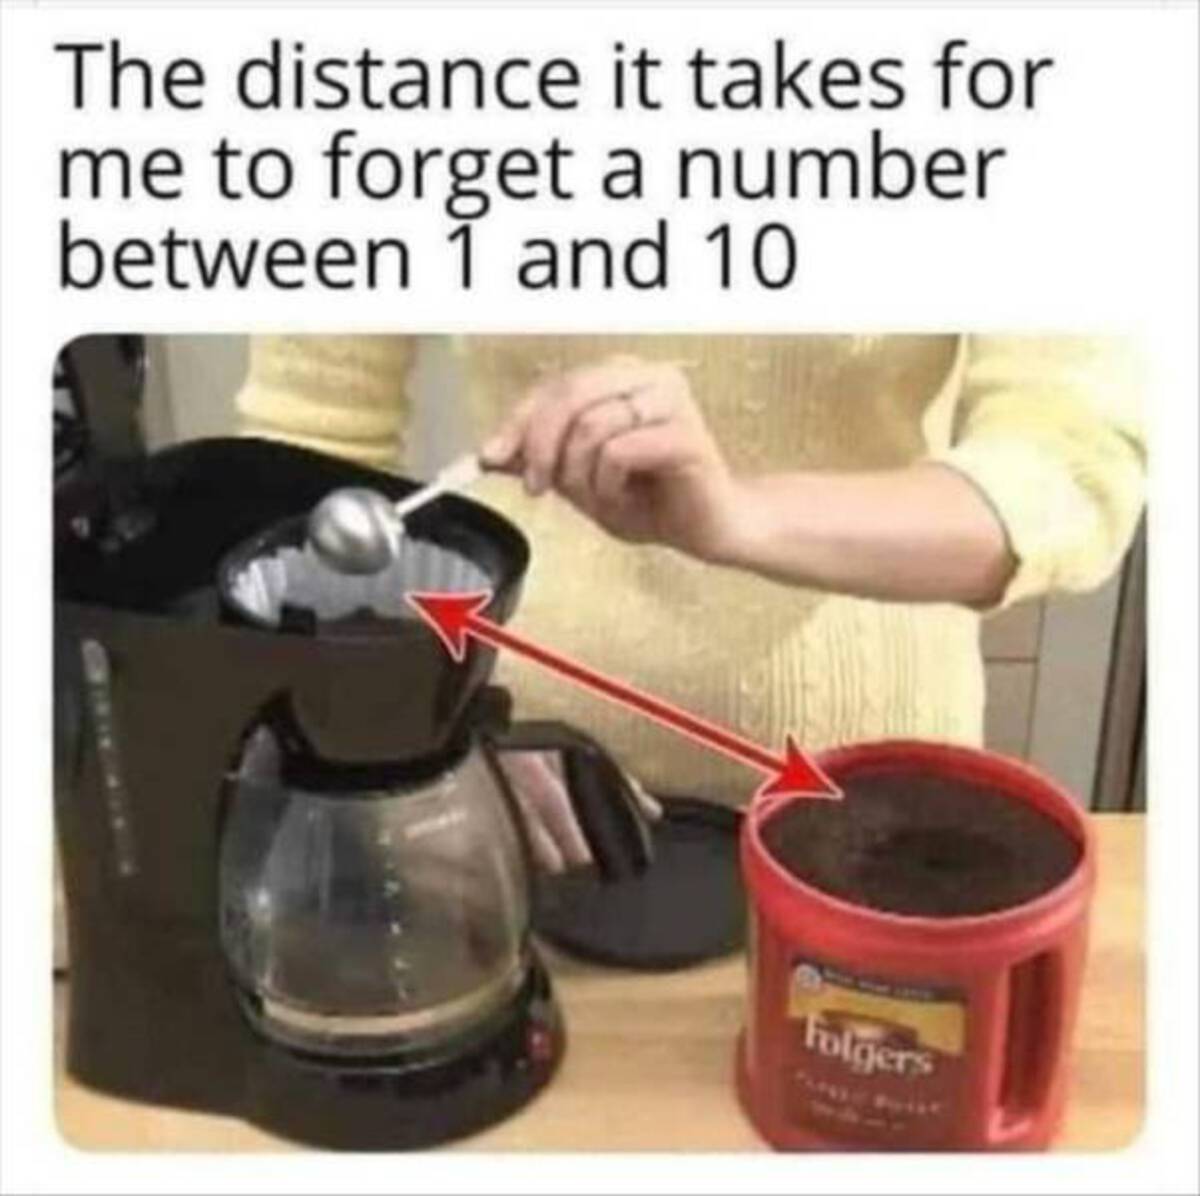 distance it takes for me to forget - The distance it takes for me to forget a number between 1 and 10 Folgers